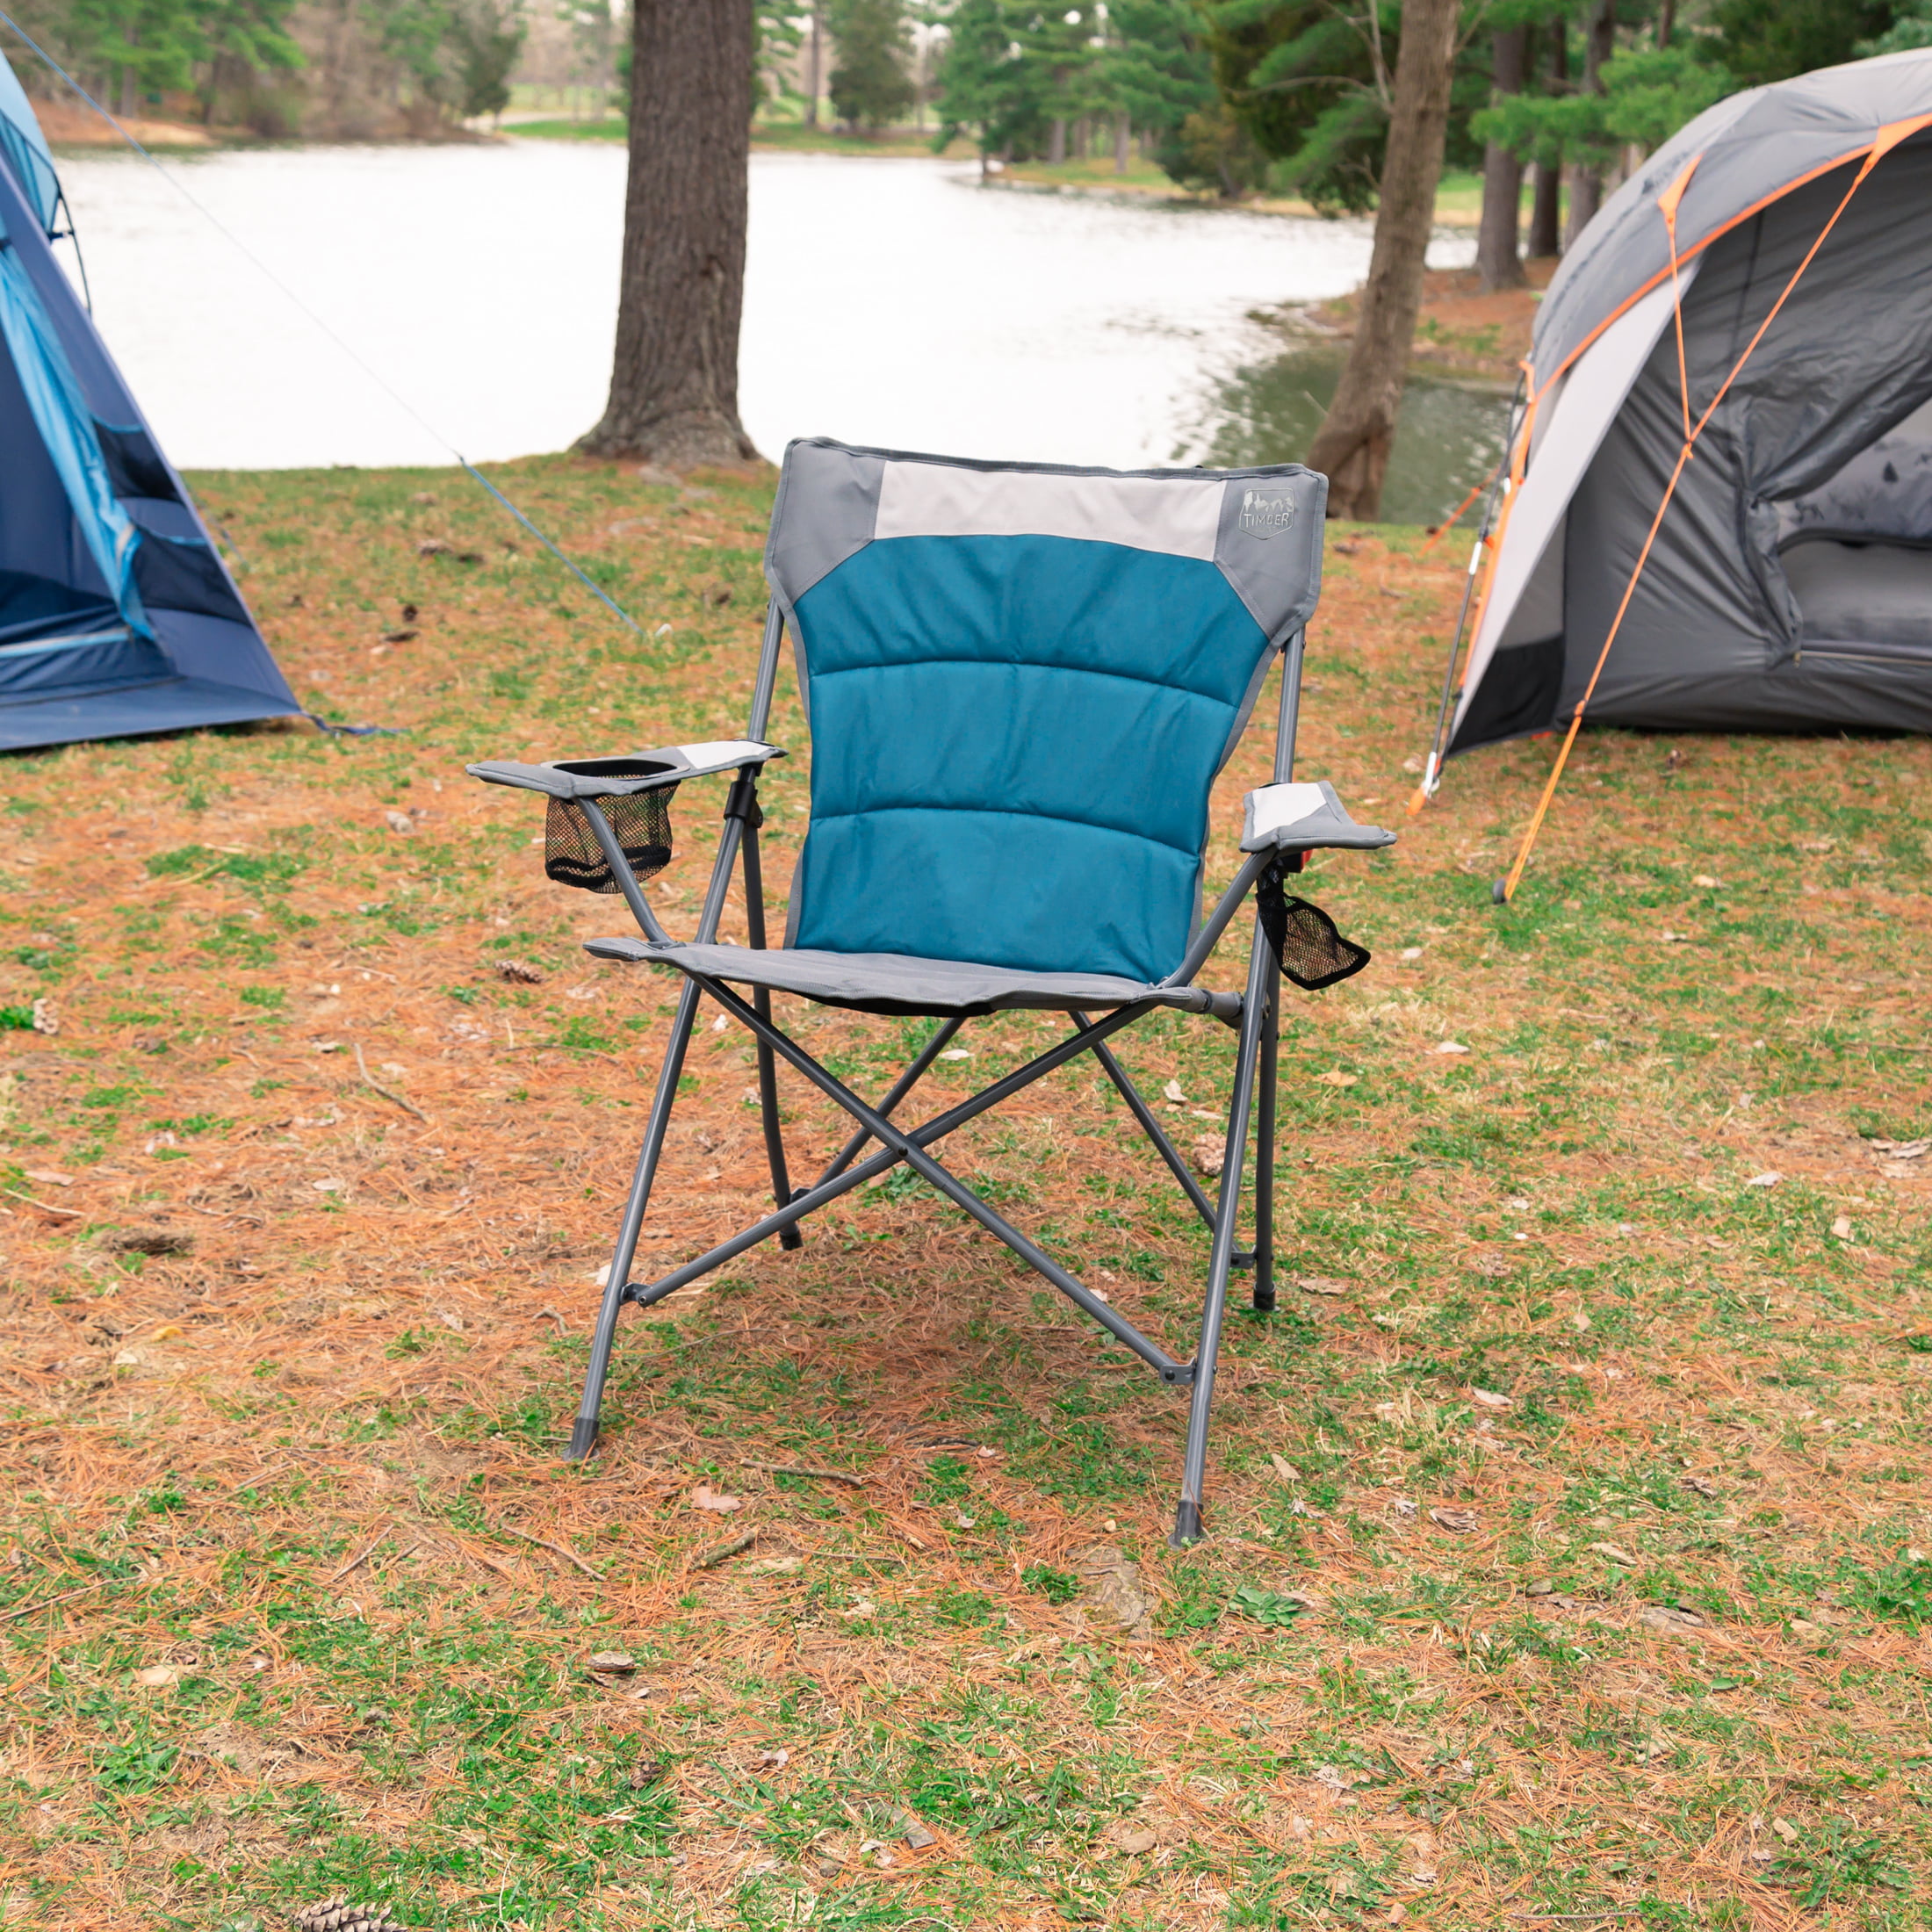 Timber Ridge Basswood Tension Camping Chair, Blue, Adult